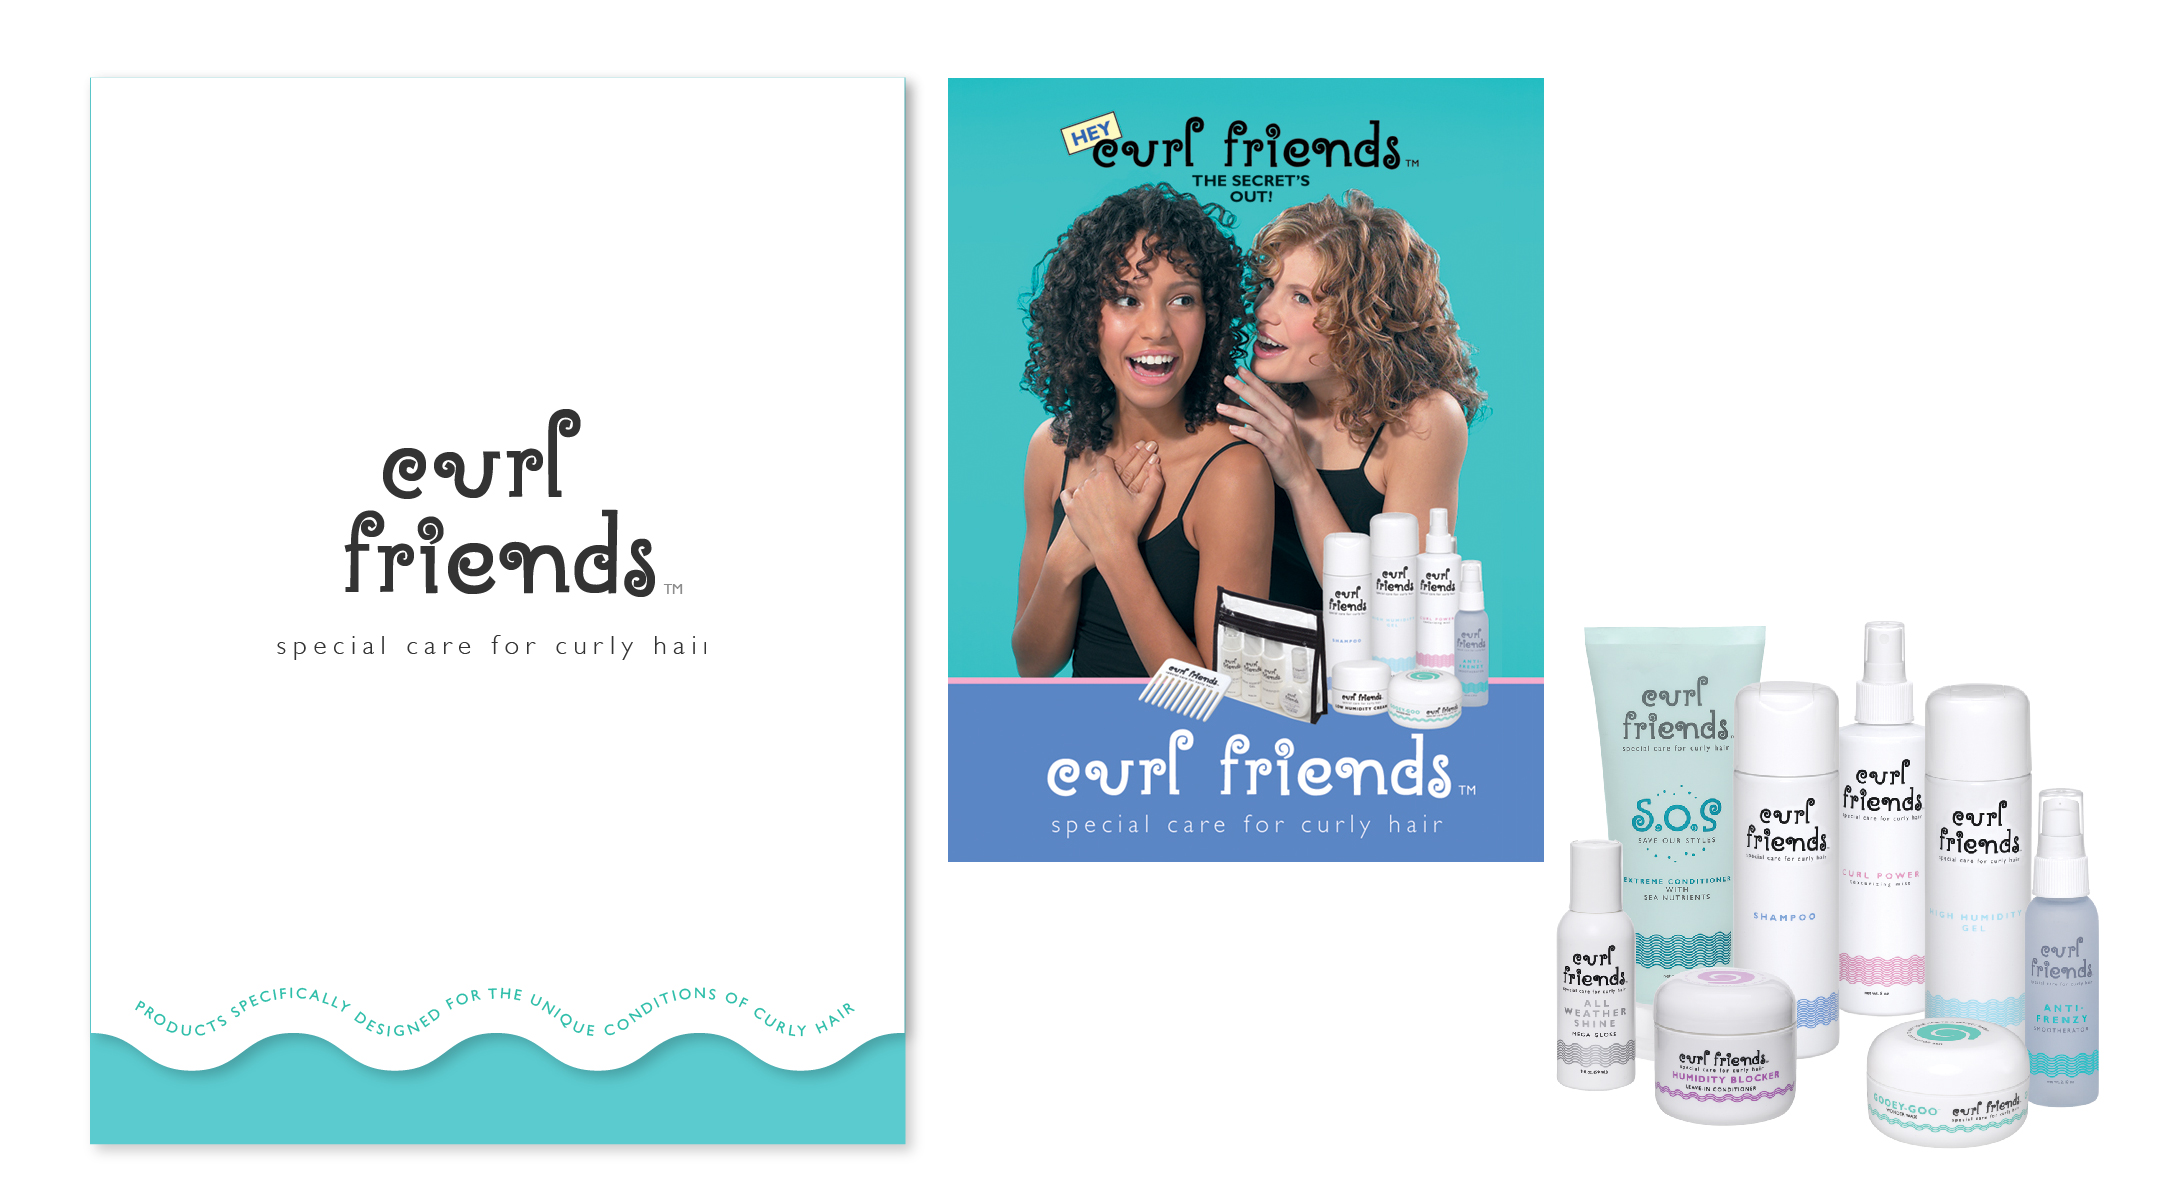 Curlfriends logo, media kit, advertising and products.